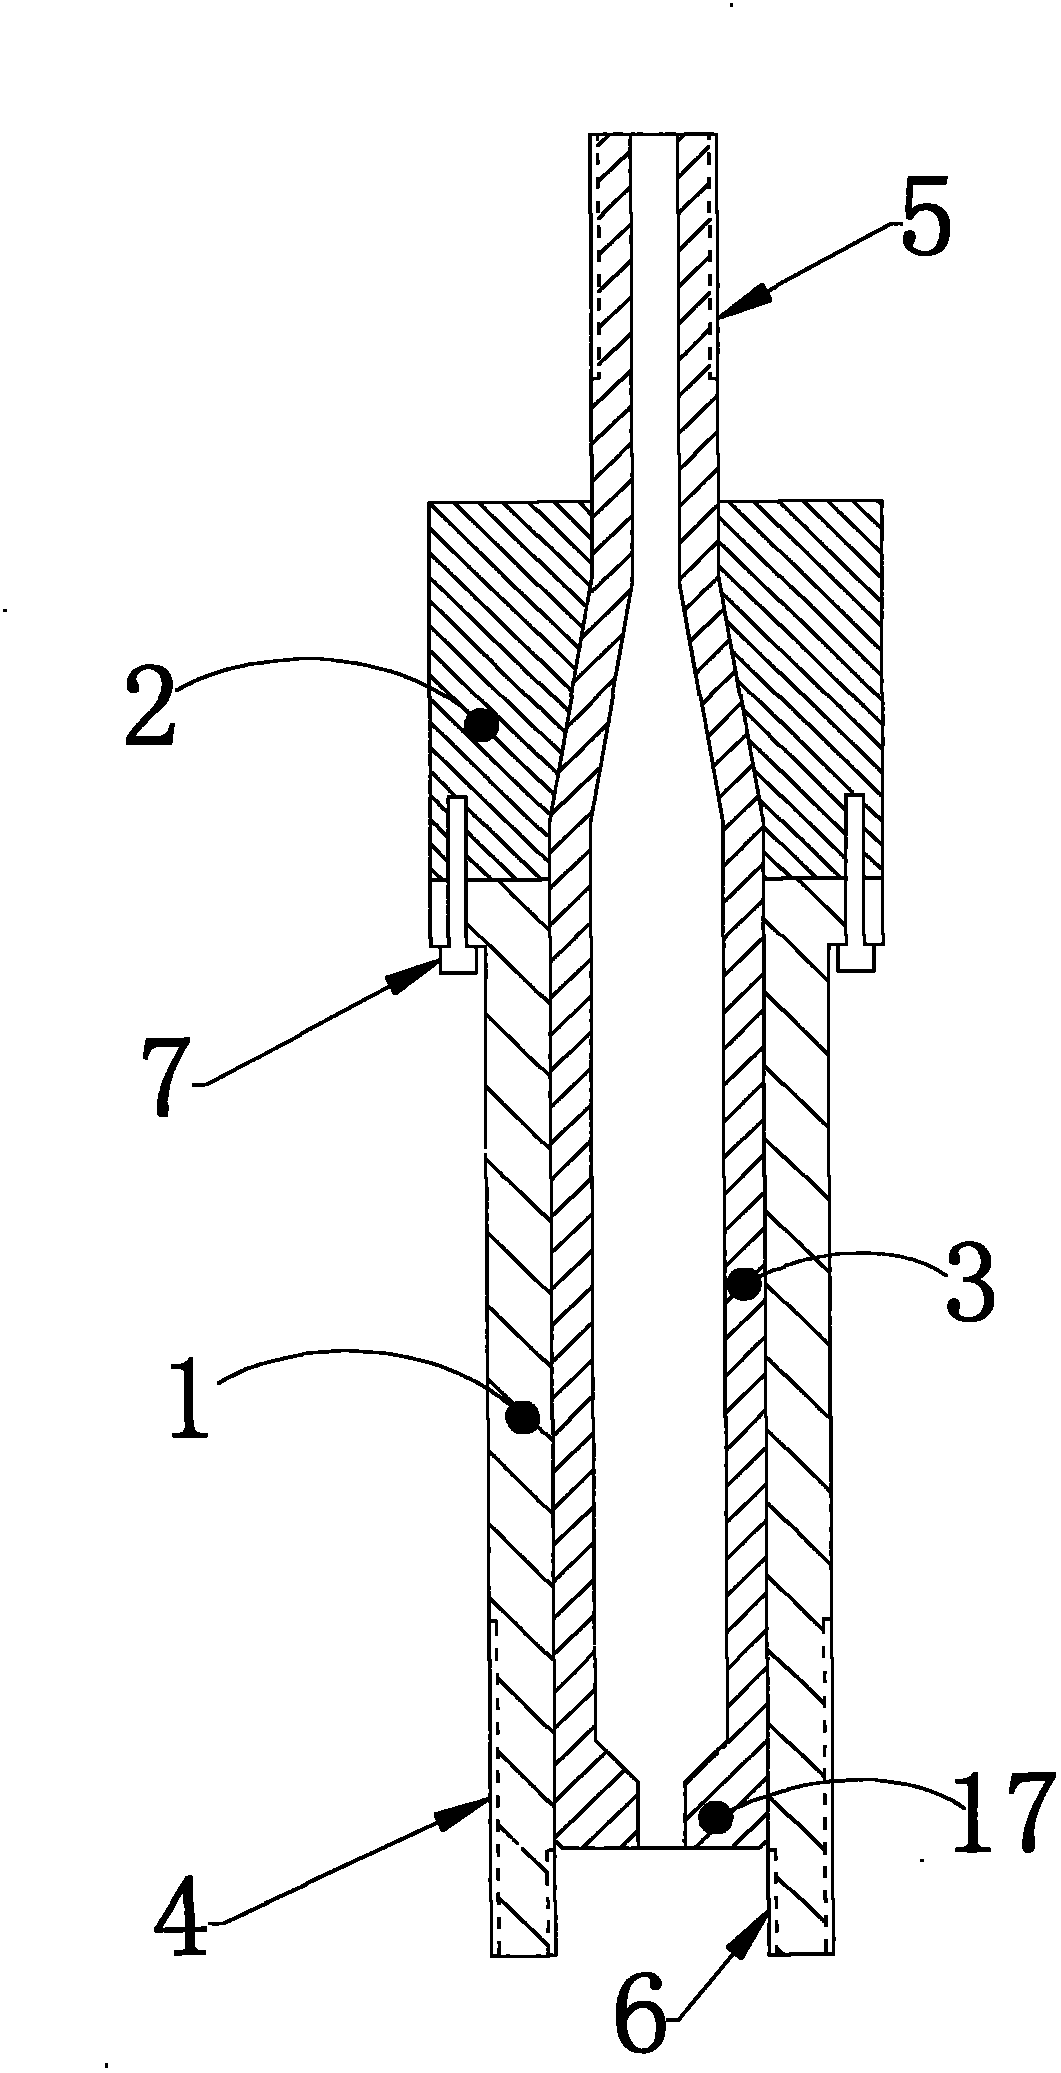 High-strength, constant-resistance extender for anchorage cables and usage thereof